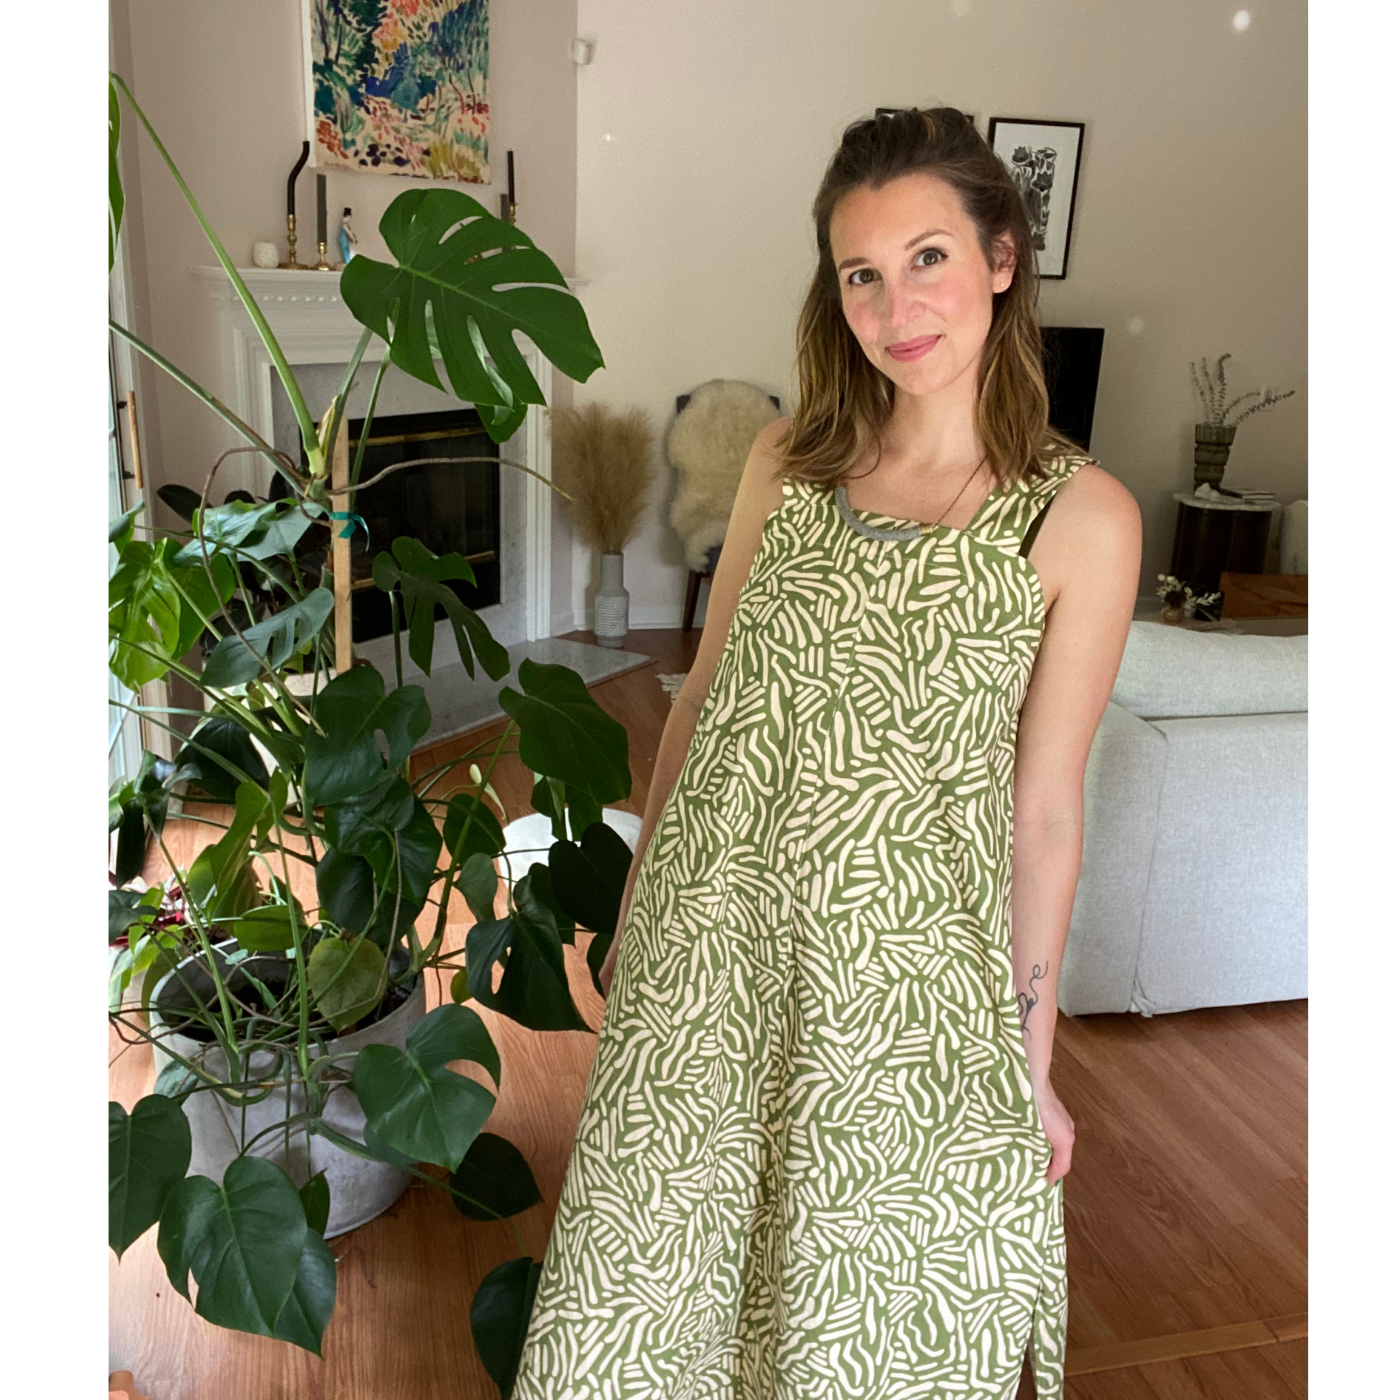 Theresa stands in a living room near a large monstera plant and smiles at the camera. She is wearing a long maxi dress with an olive green background and short wavy white lines running through the design in all directions.